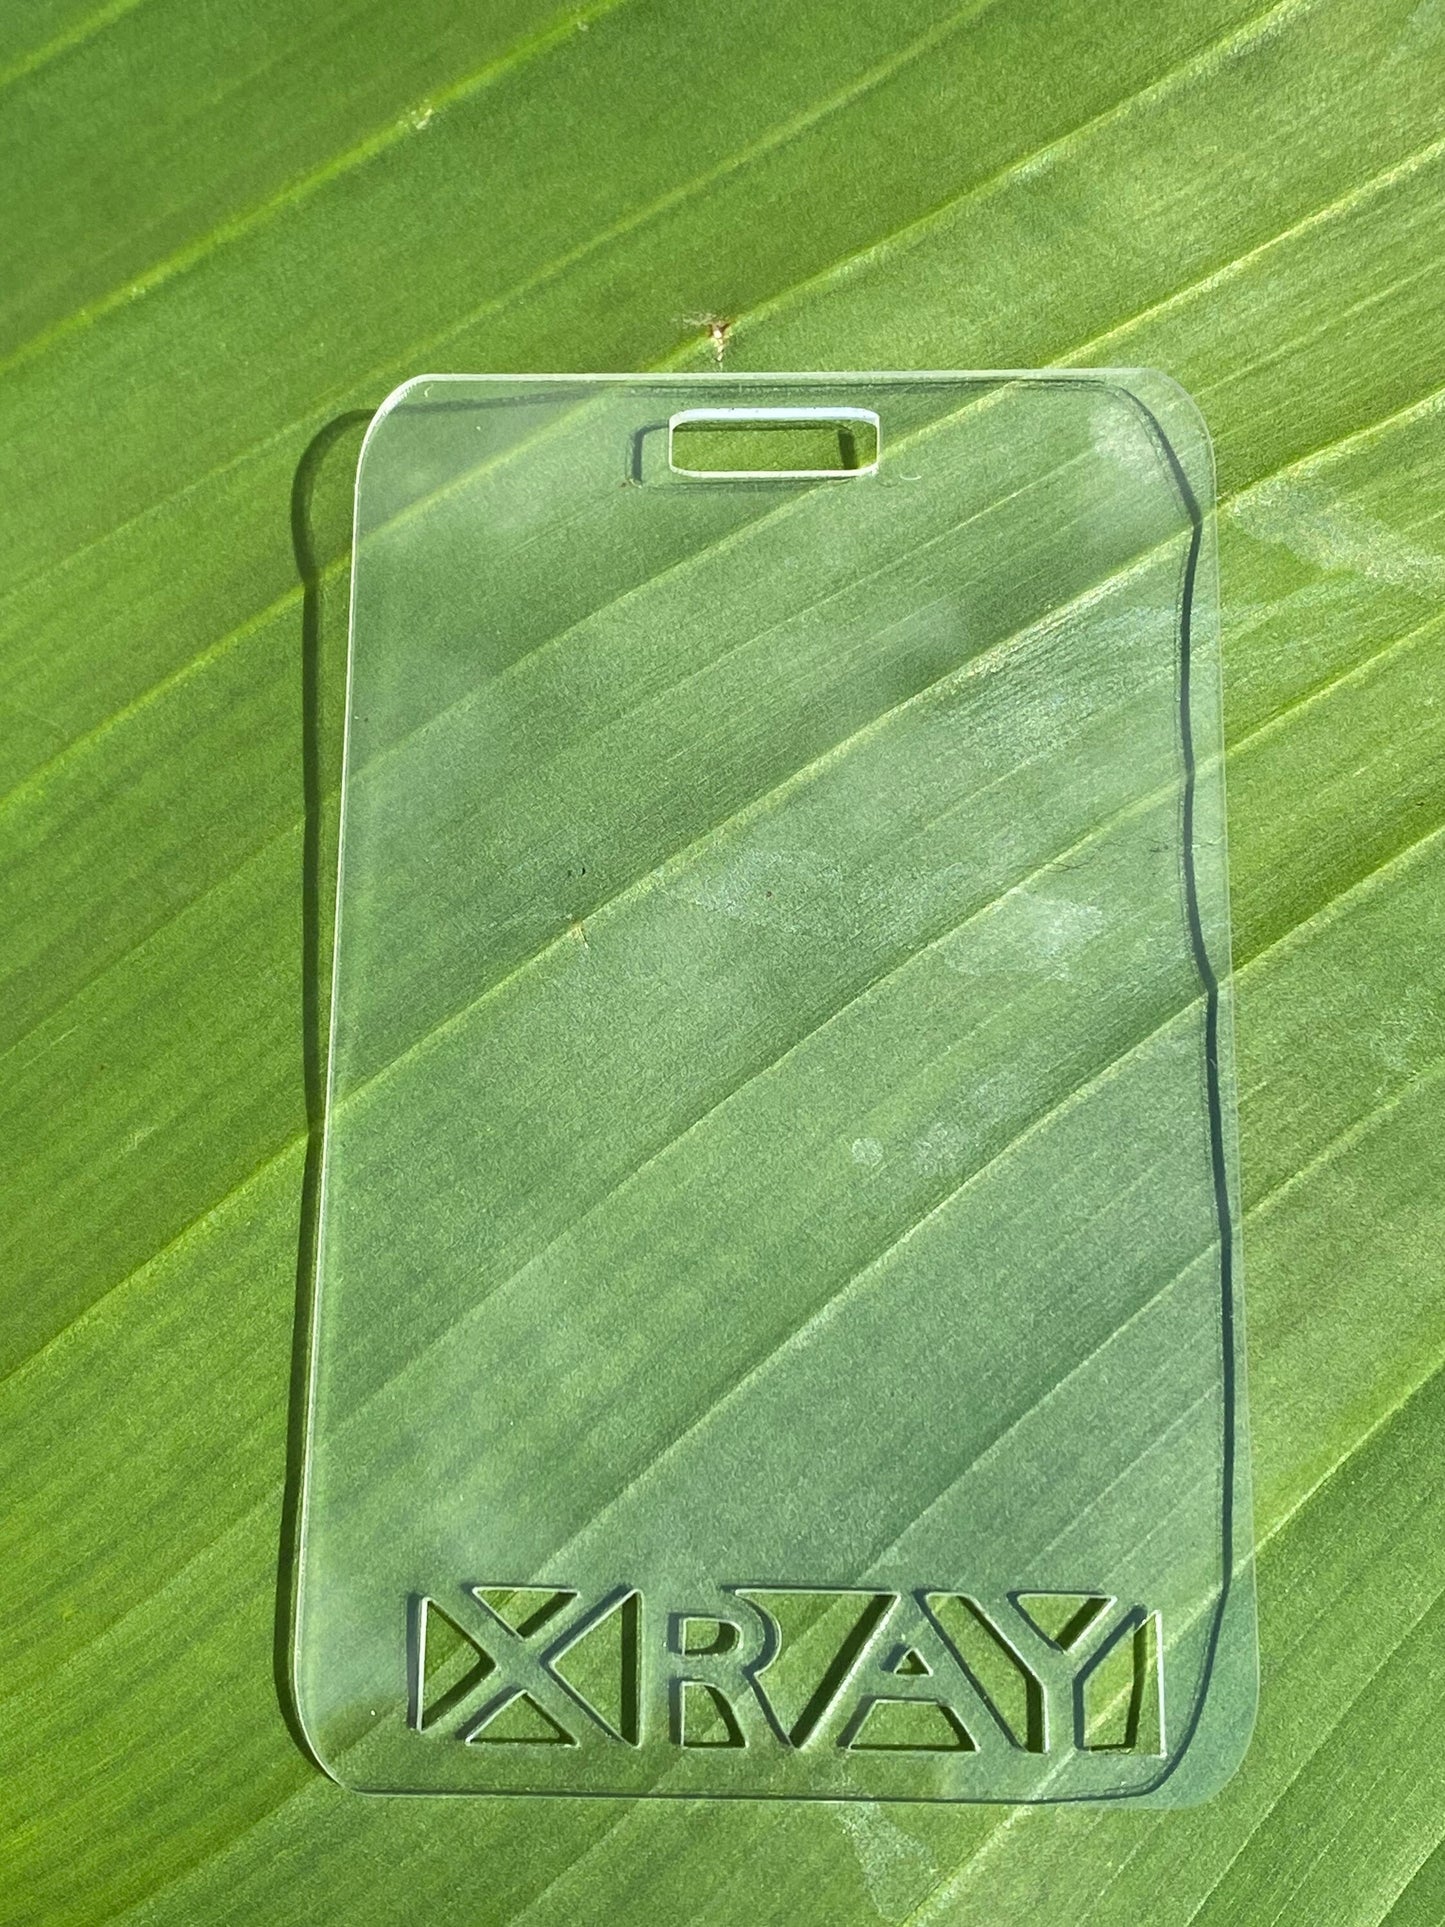 Rad Pad Clear for Holding Xray Markers